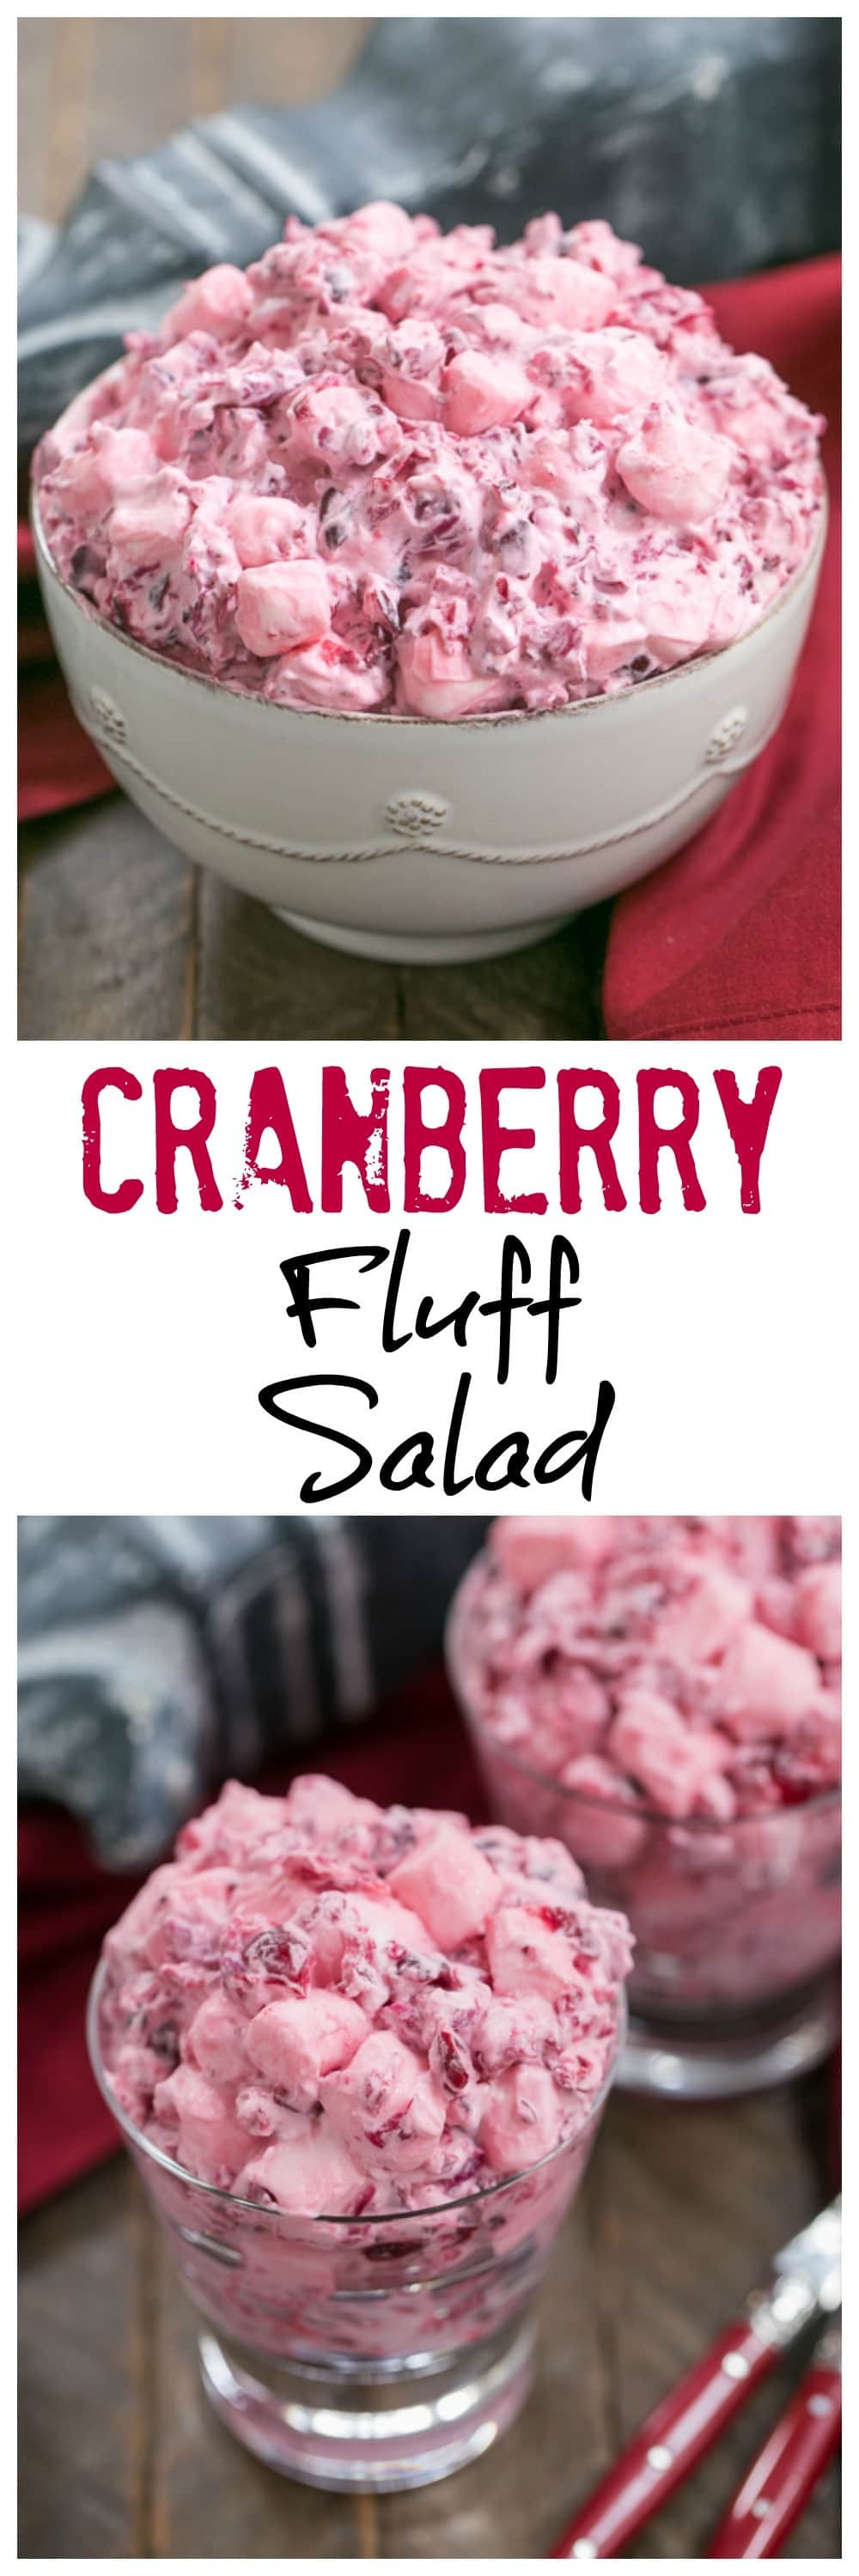 Cranberry Salad Recipes For Thanksgiving
 Cranberry Fluff Salad SundaySupper That Skinny Chick